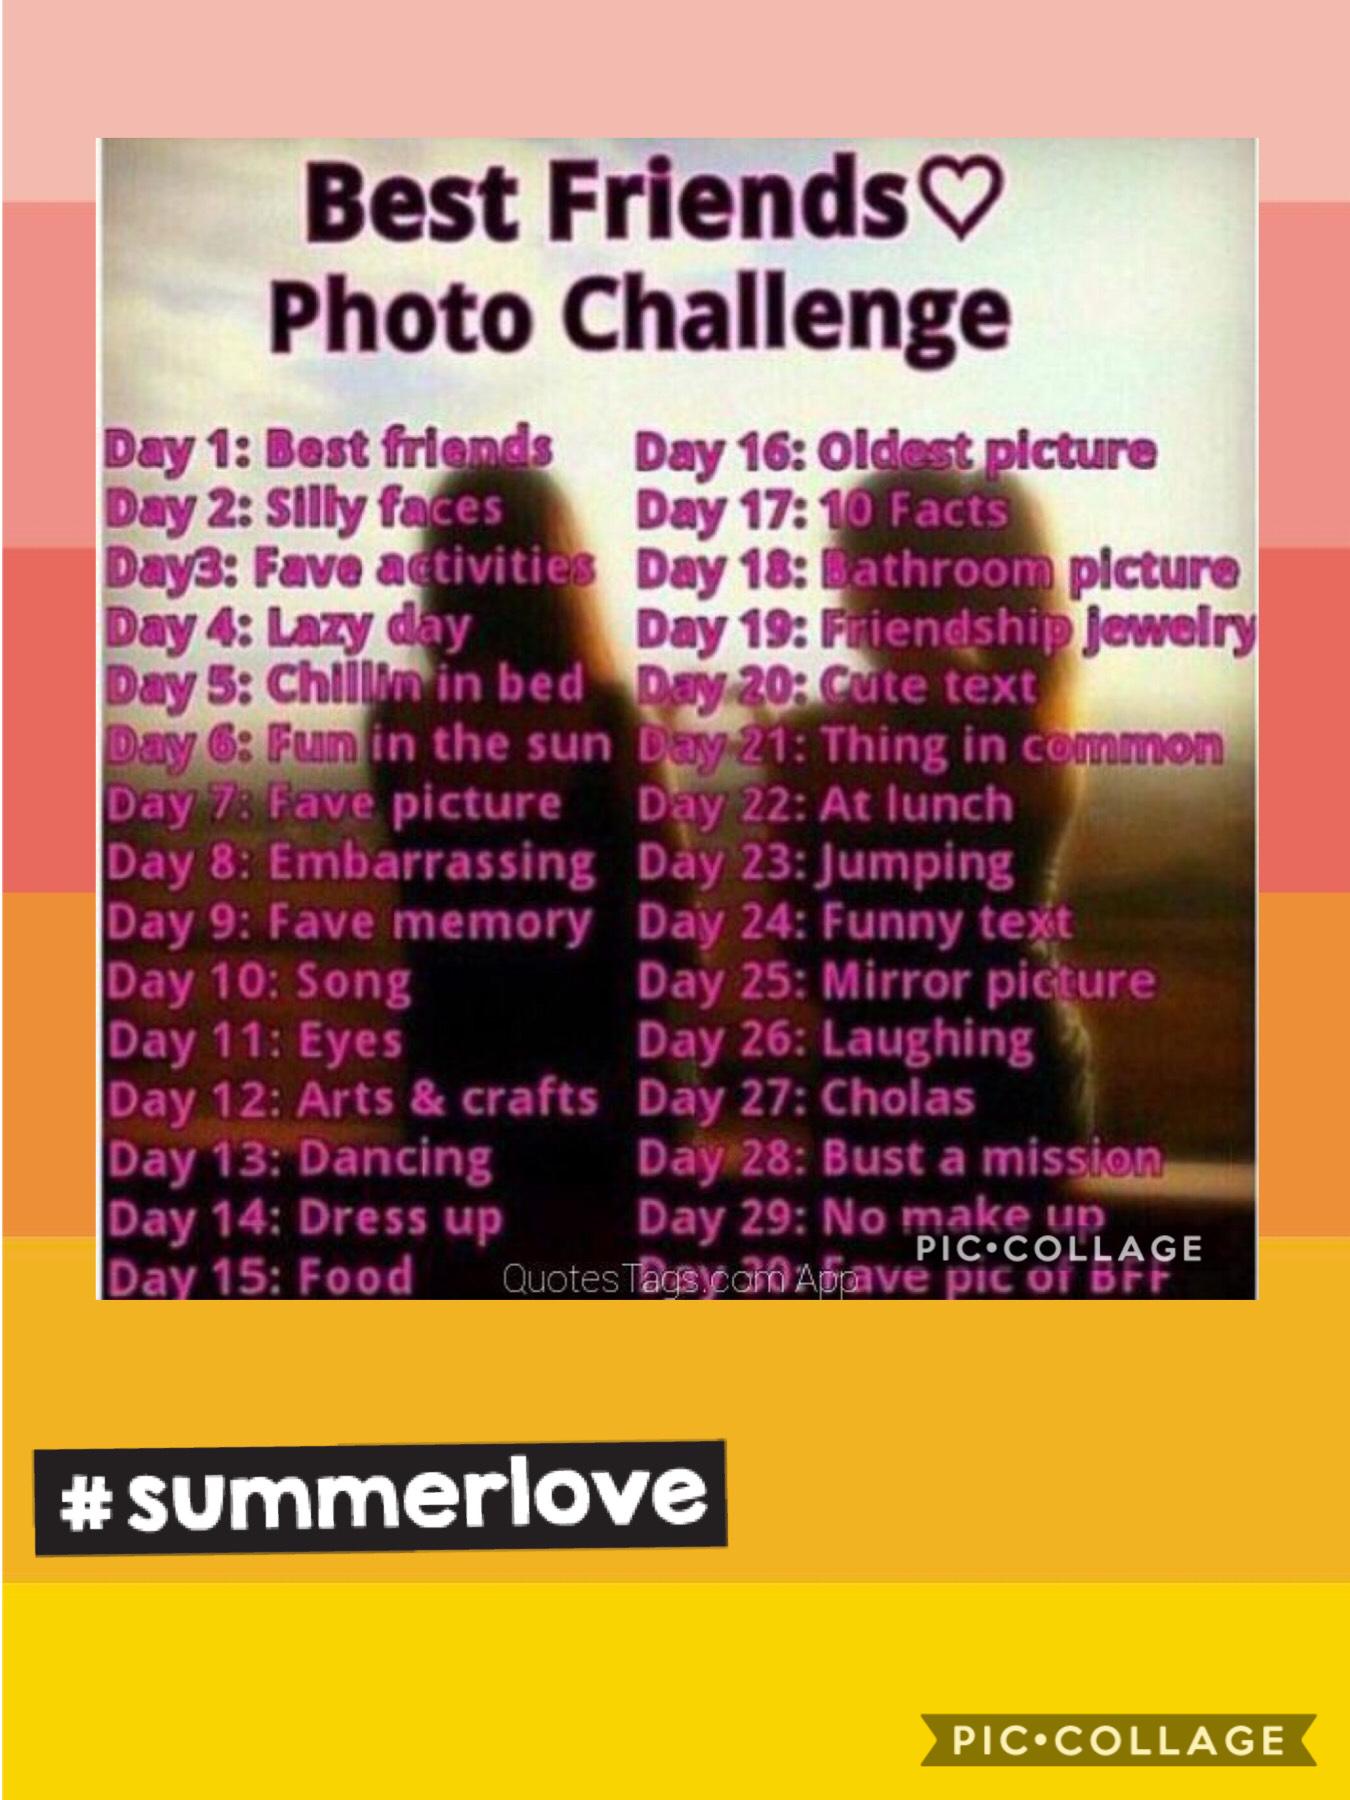 ~Tap~

I challenge all of my followers to do this summer bucket list with there best friend. Make a collage of all the pics you make and post them and put the hashtag
#summerlove
I will do the same thing with my bestie this weekend.  Can’t wait to see all